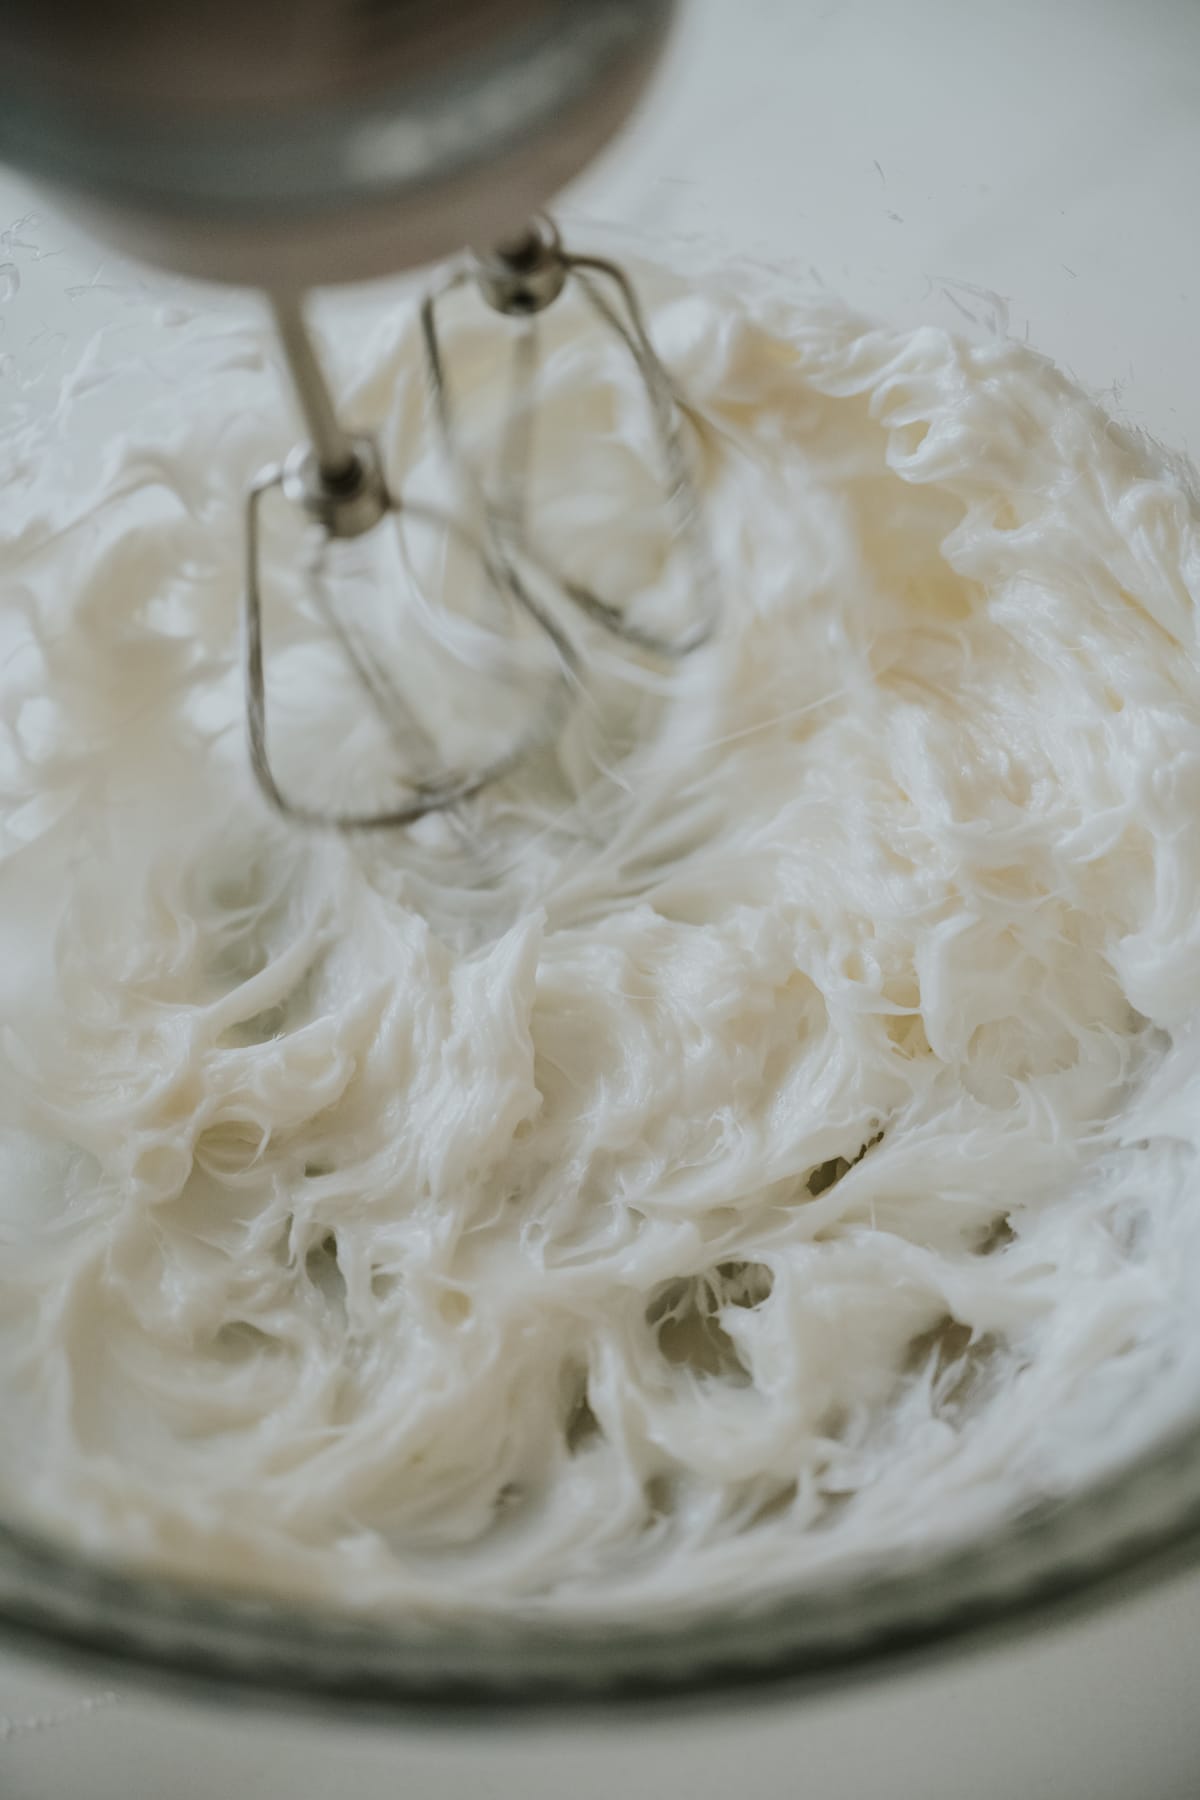 lard in a mixing bowl with an electric mixer, creaming it like butter.